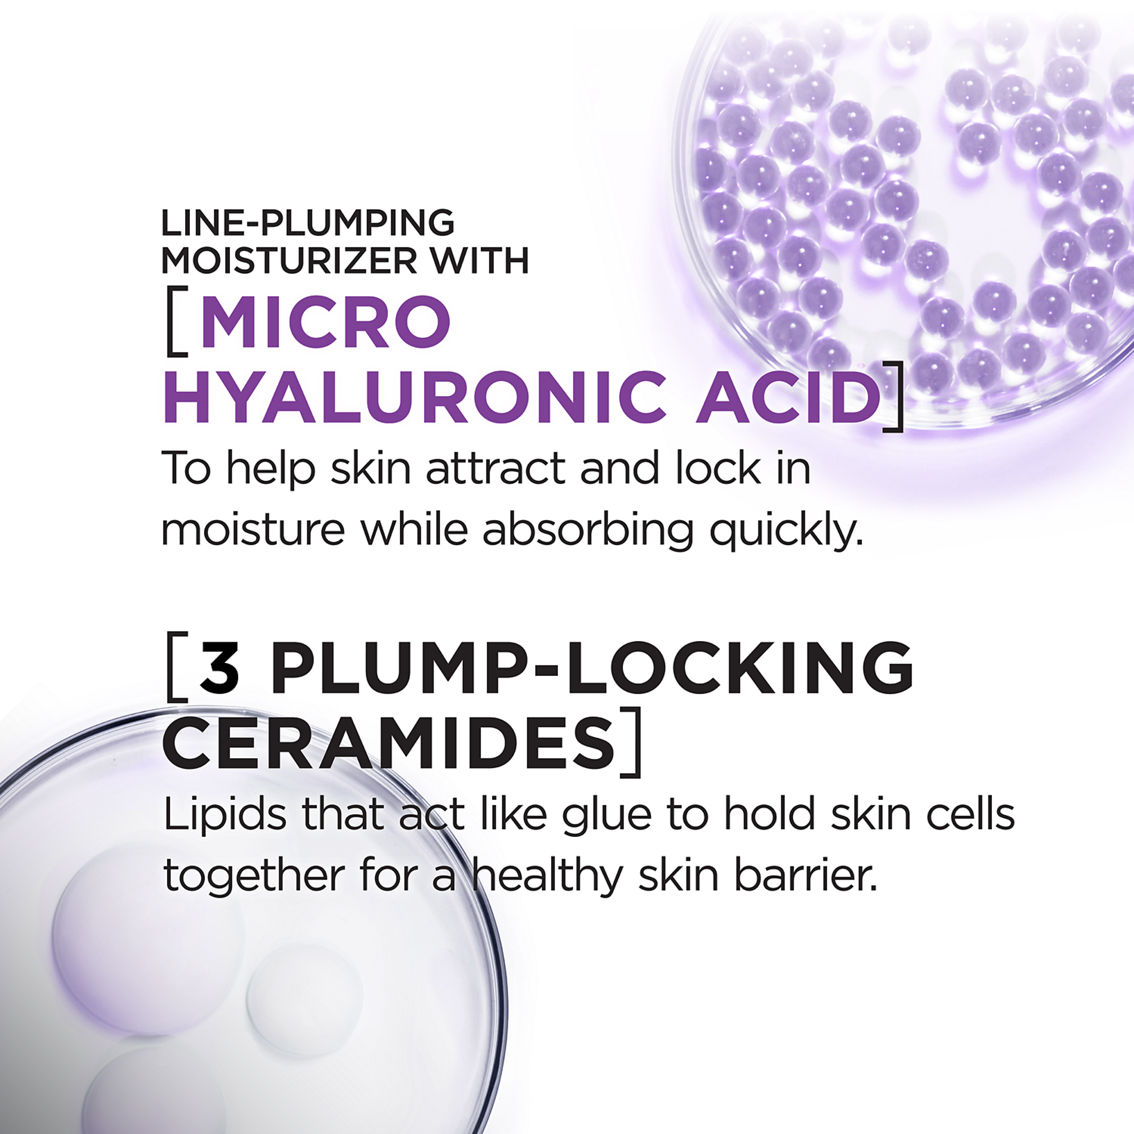 L'Oreal Micro Hyaluronic Acid + Ceramides Line-Plumping Water Cream - Image 5 of 10